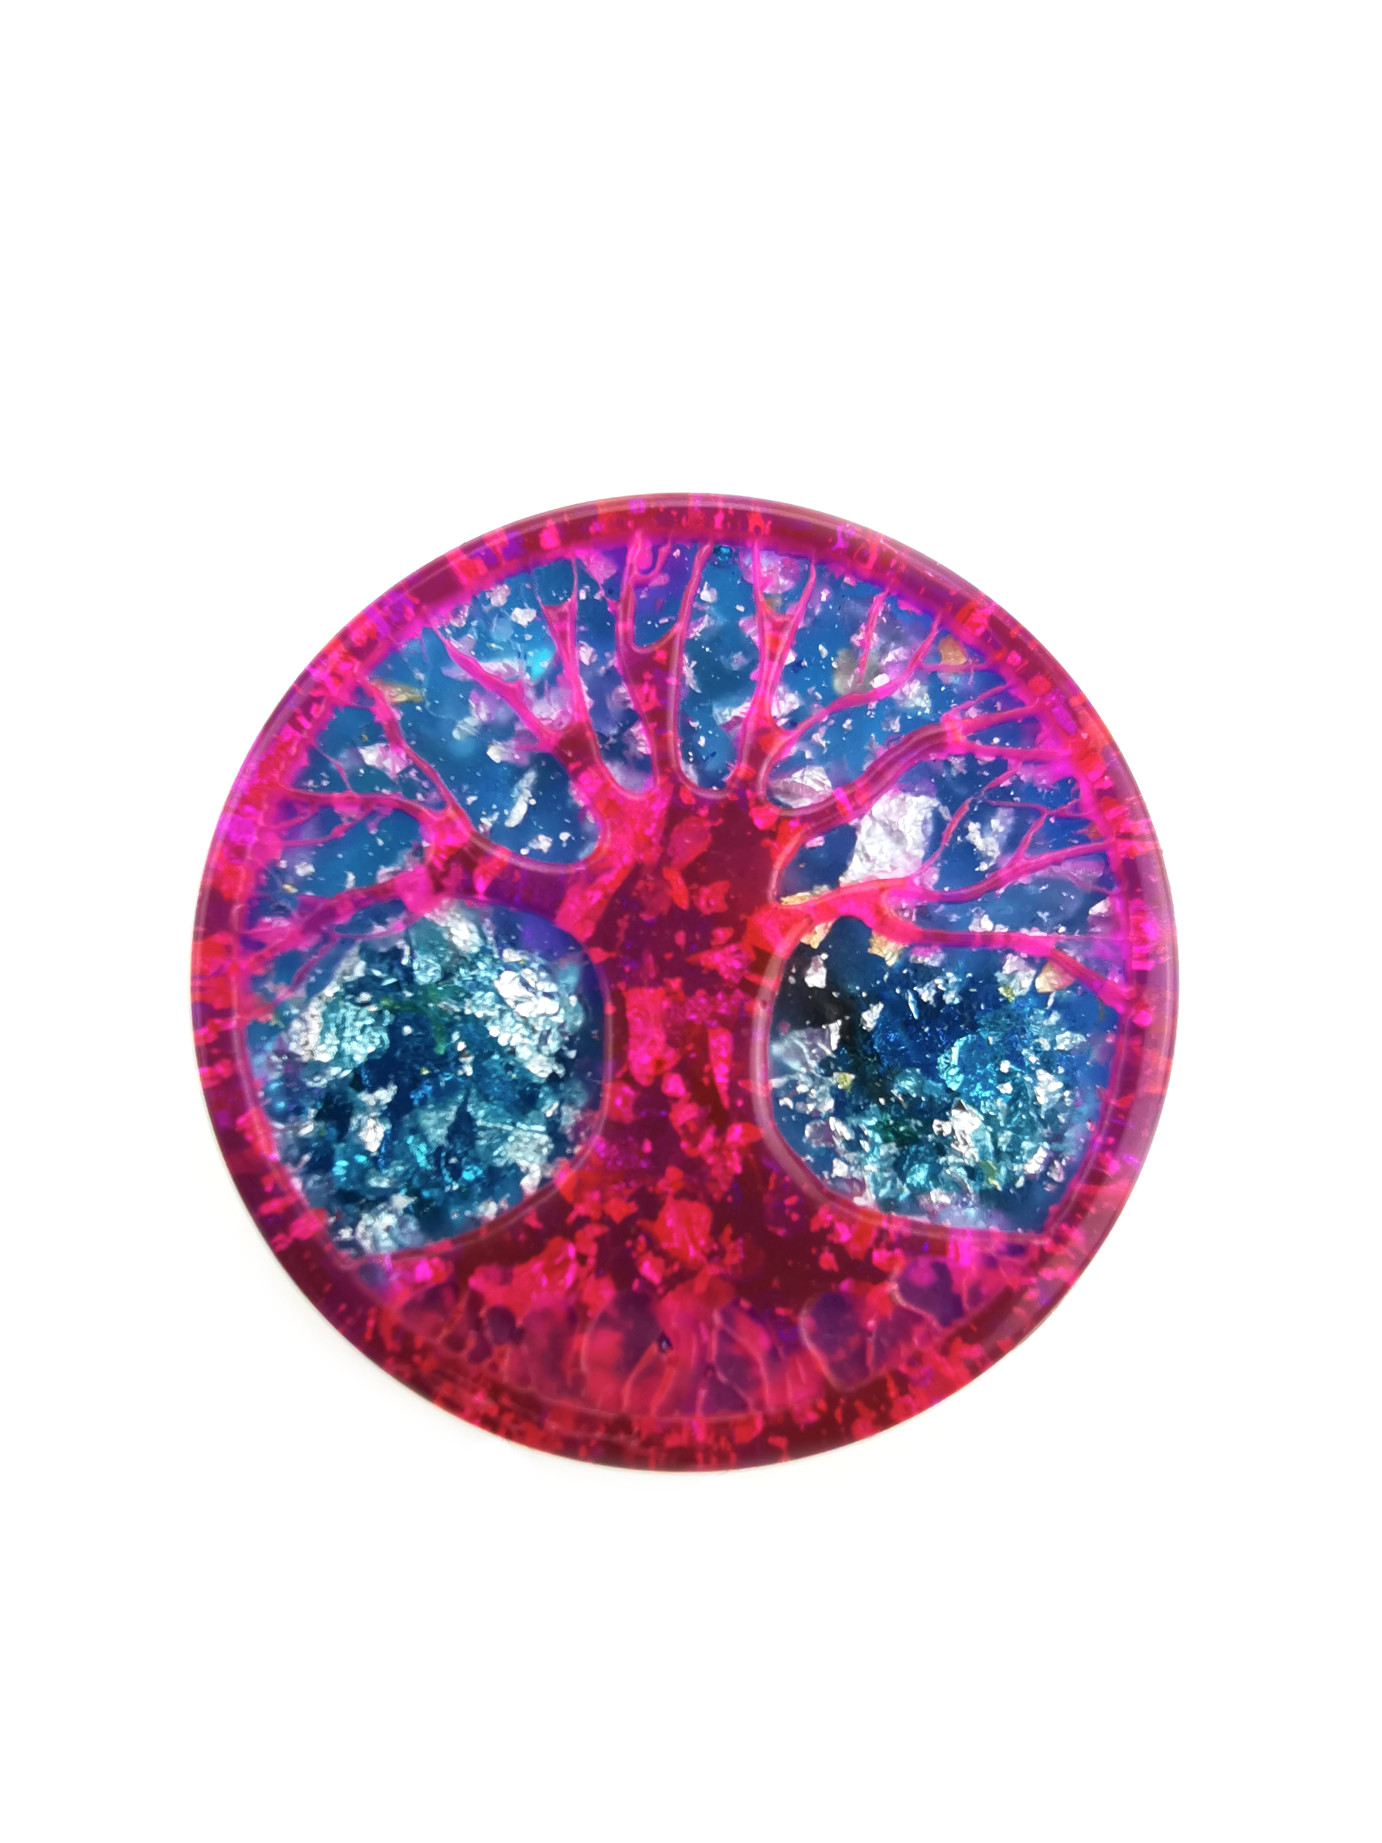 Tree of Life Orgone Energy Puck in Pink and Blue by OrgoneVibes